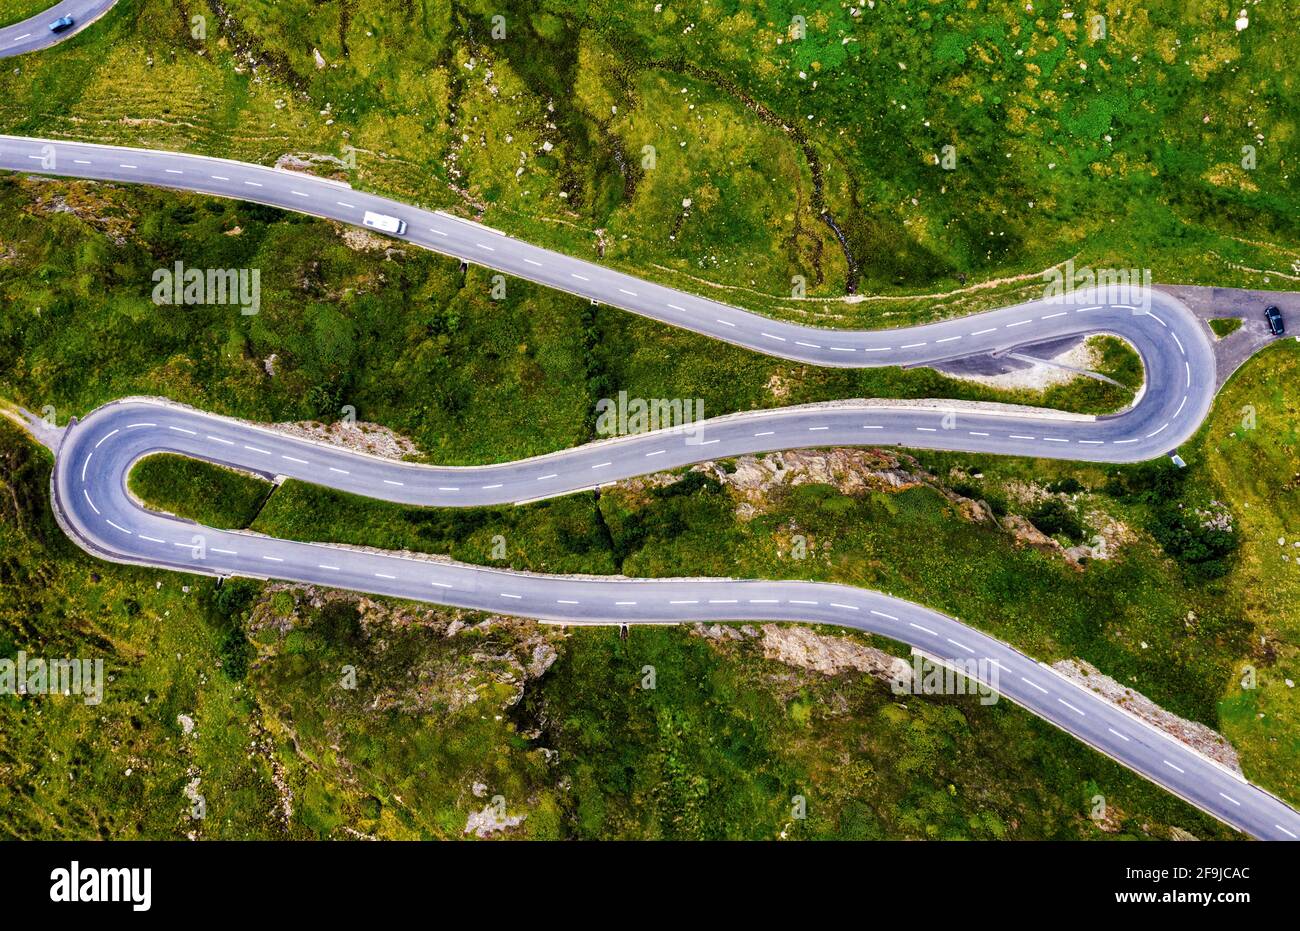 Oberalp pass winding serpentine road in central swiss Alps mountains, Switzerland Stock Photo